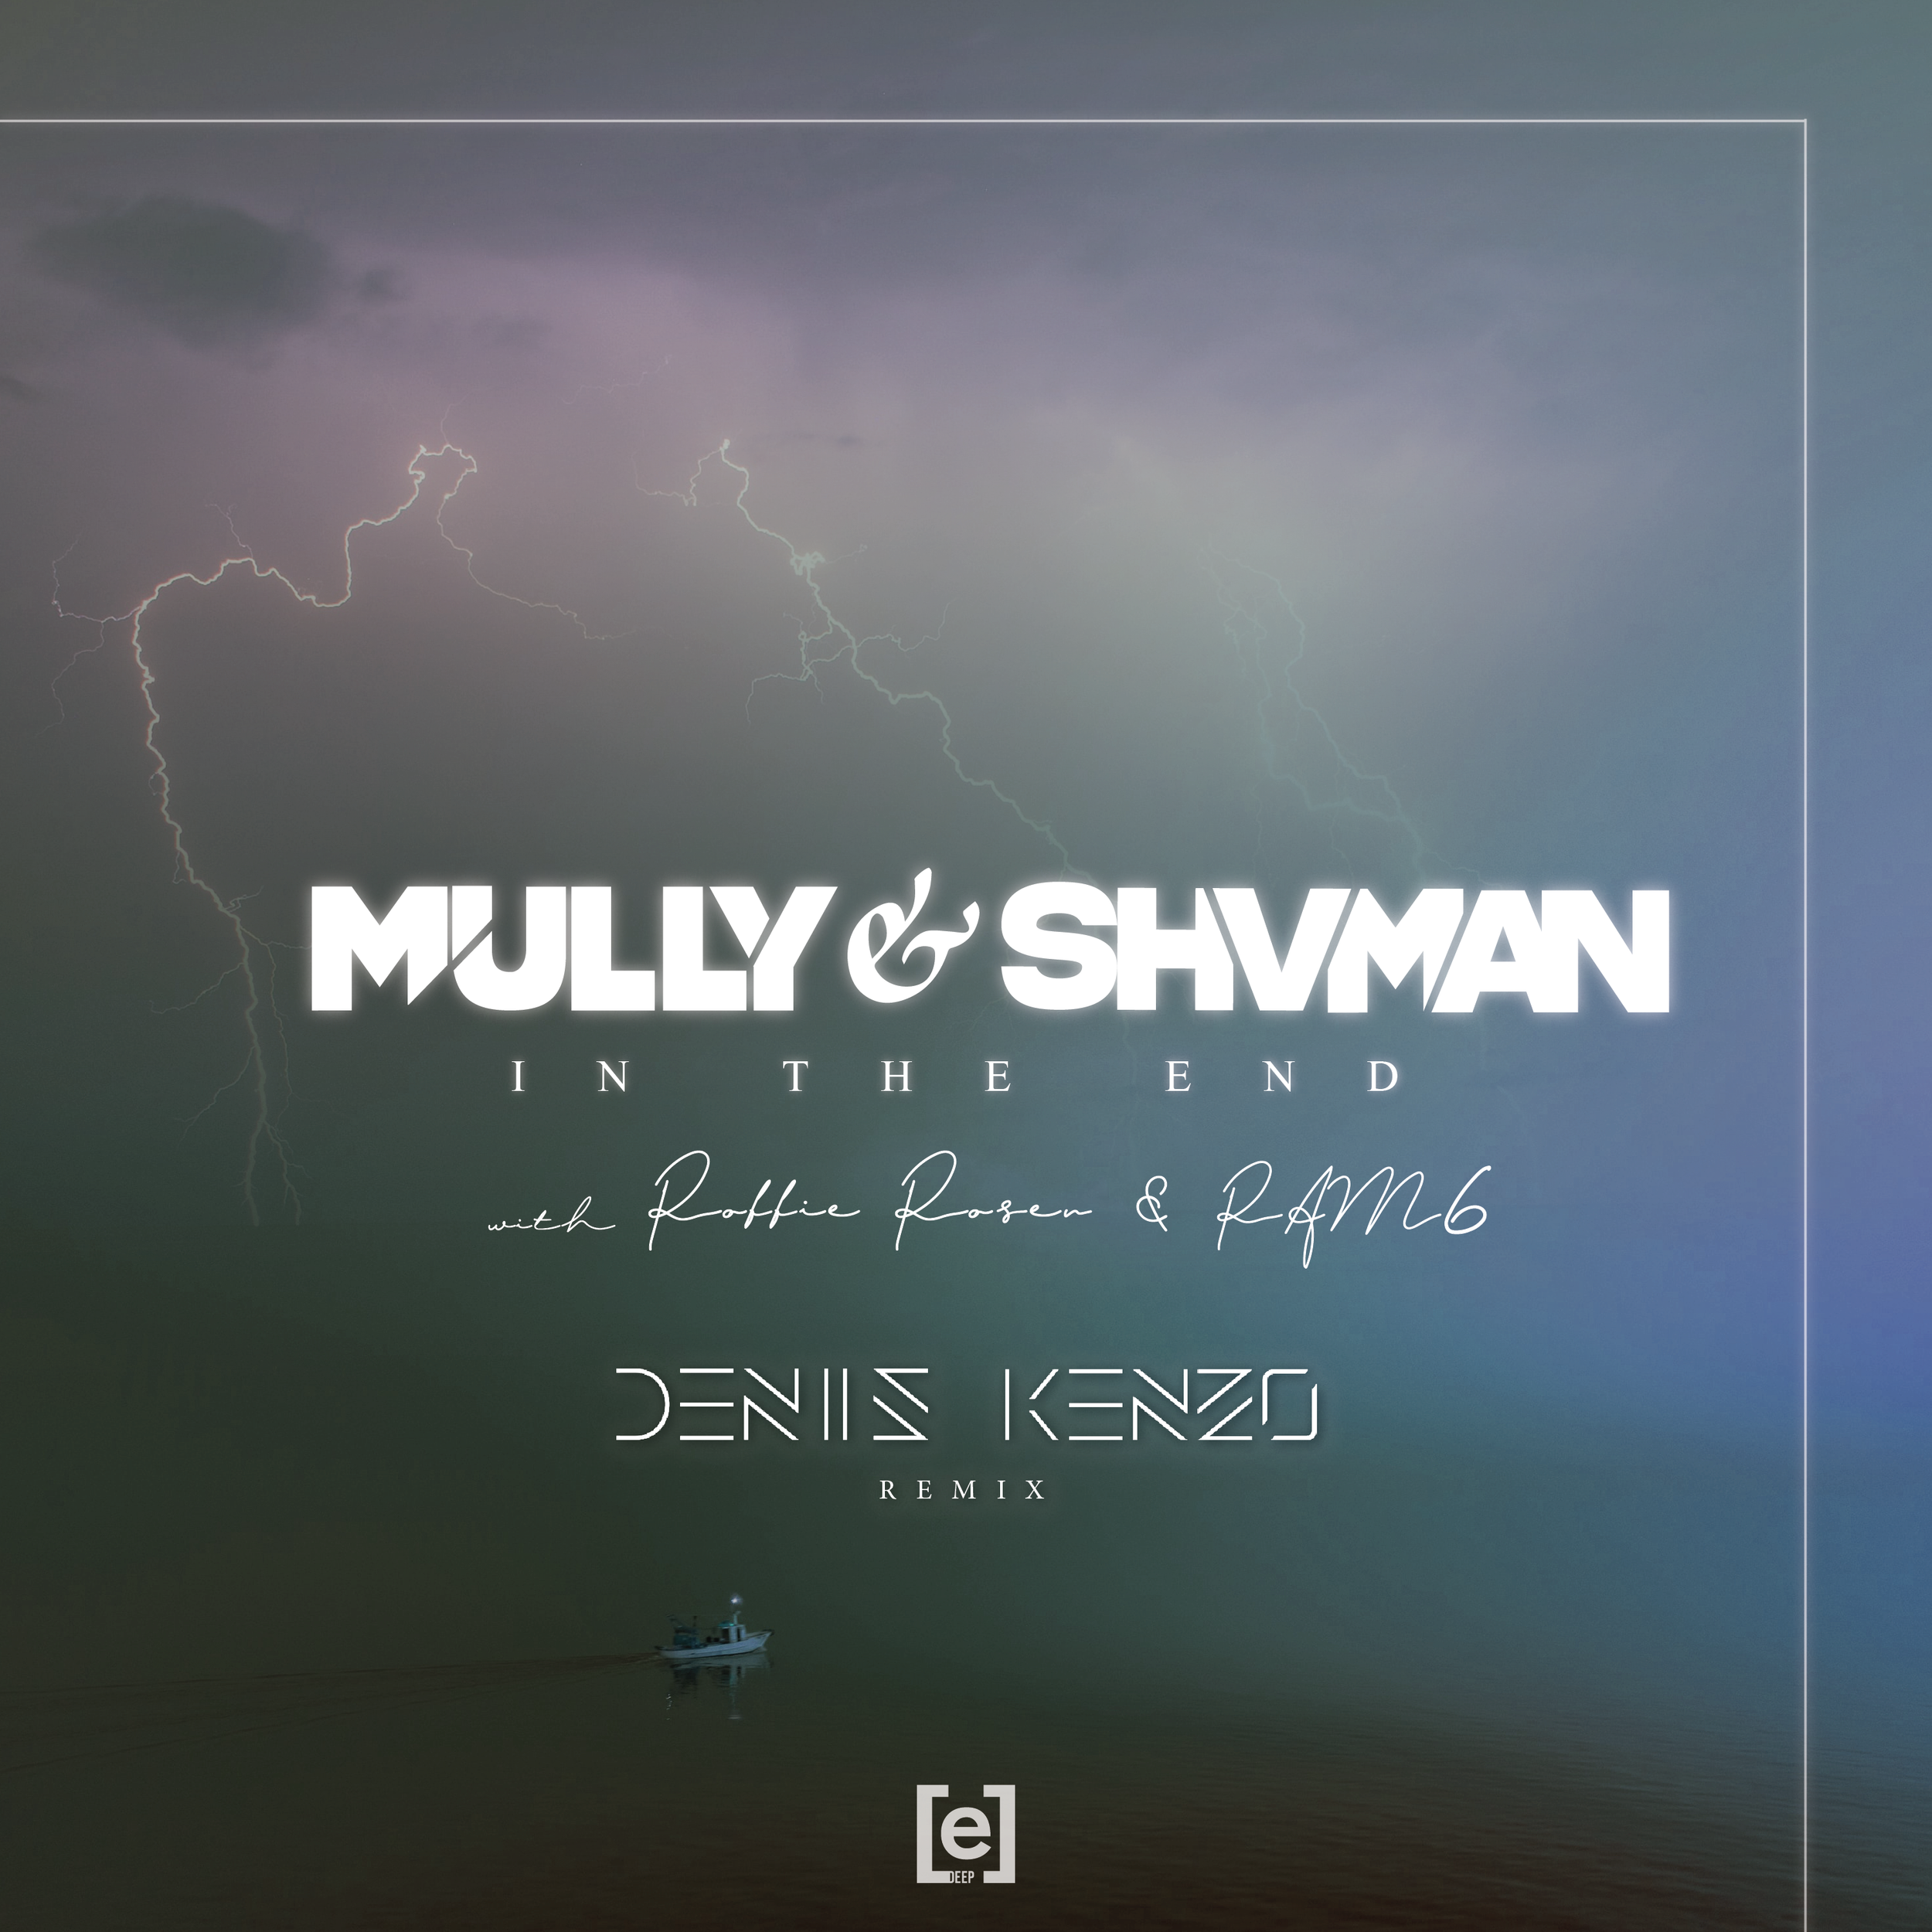 Mully & Shvman with Robbie Rosen and RAM6 - In The End (Denis Kenzo Remix) [COVER].png